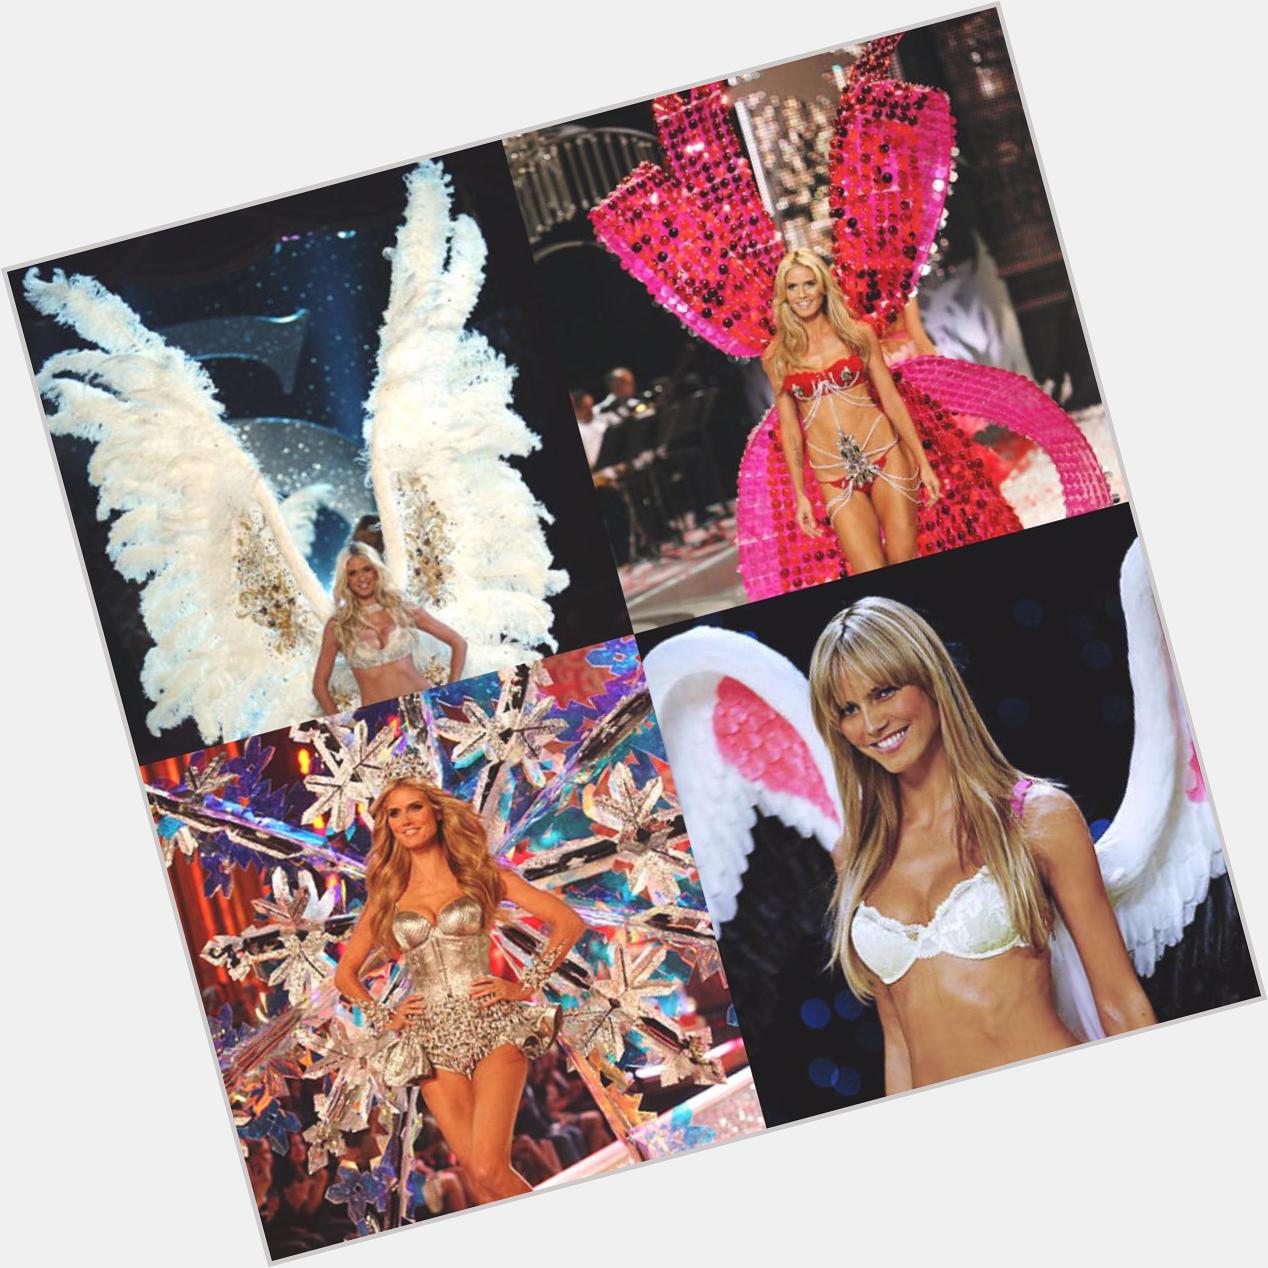 Happy birthday to the one and only Heidi Klum   incredible woman, mom and supermodel! best wings of vsfs history 